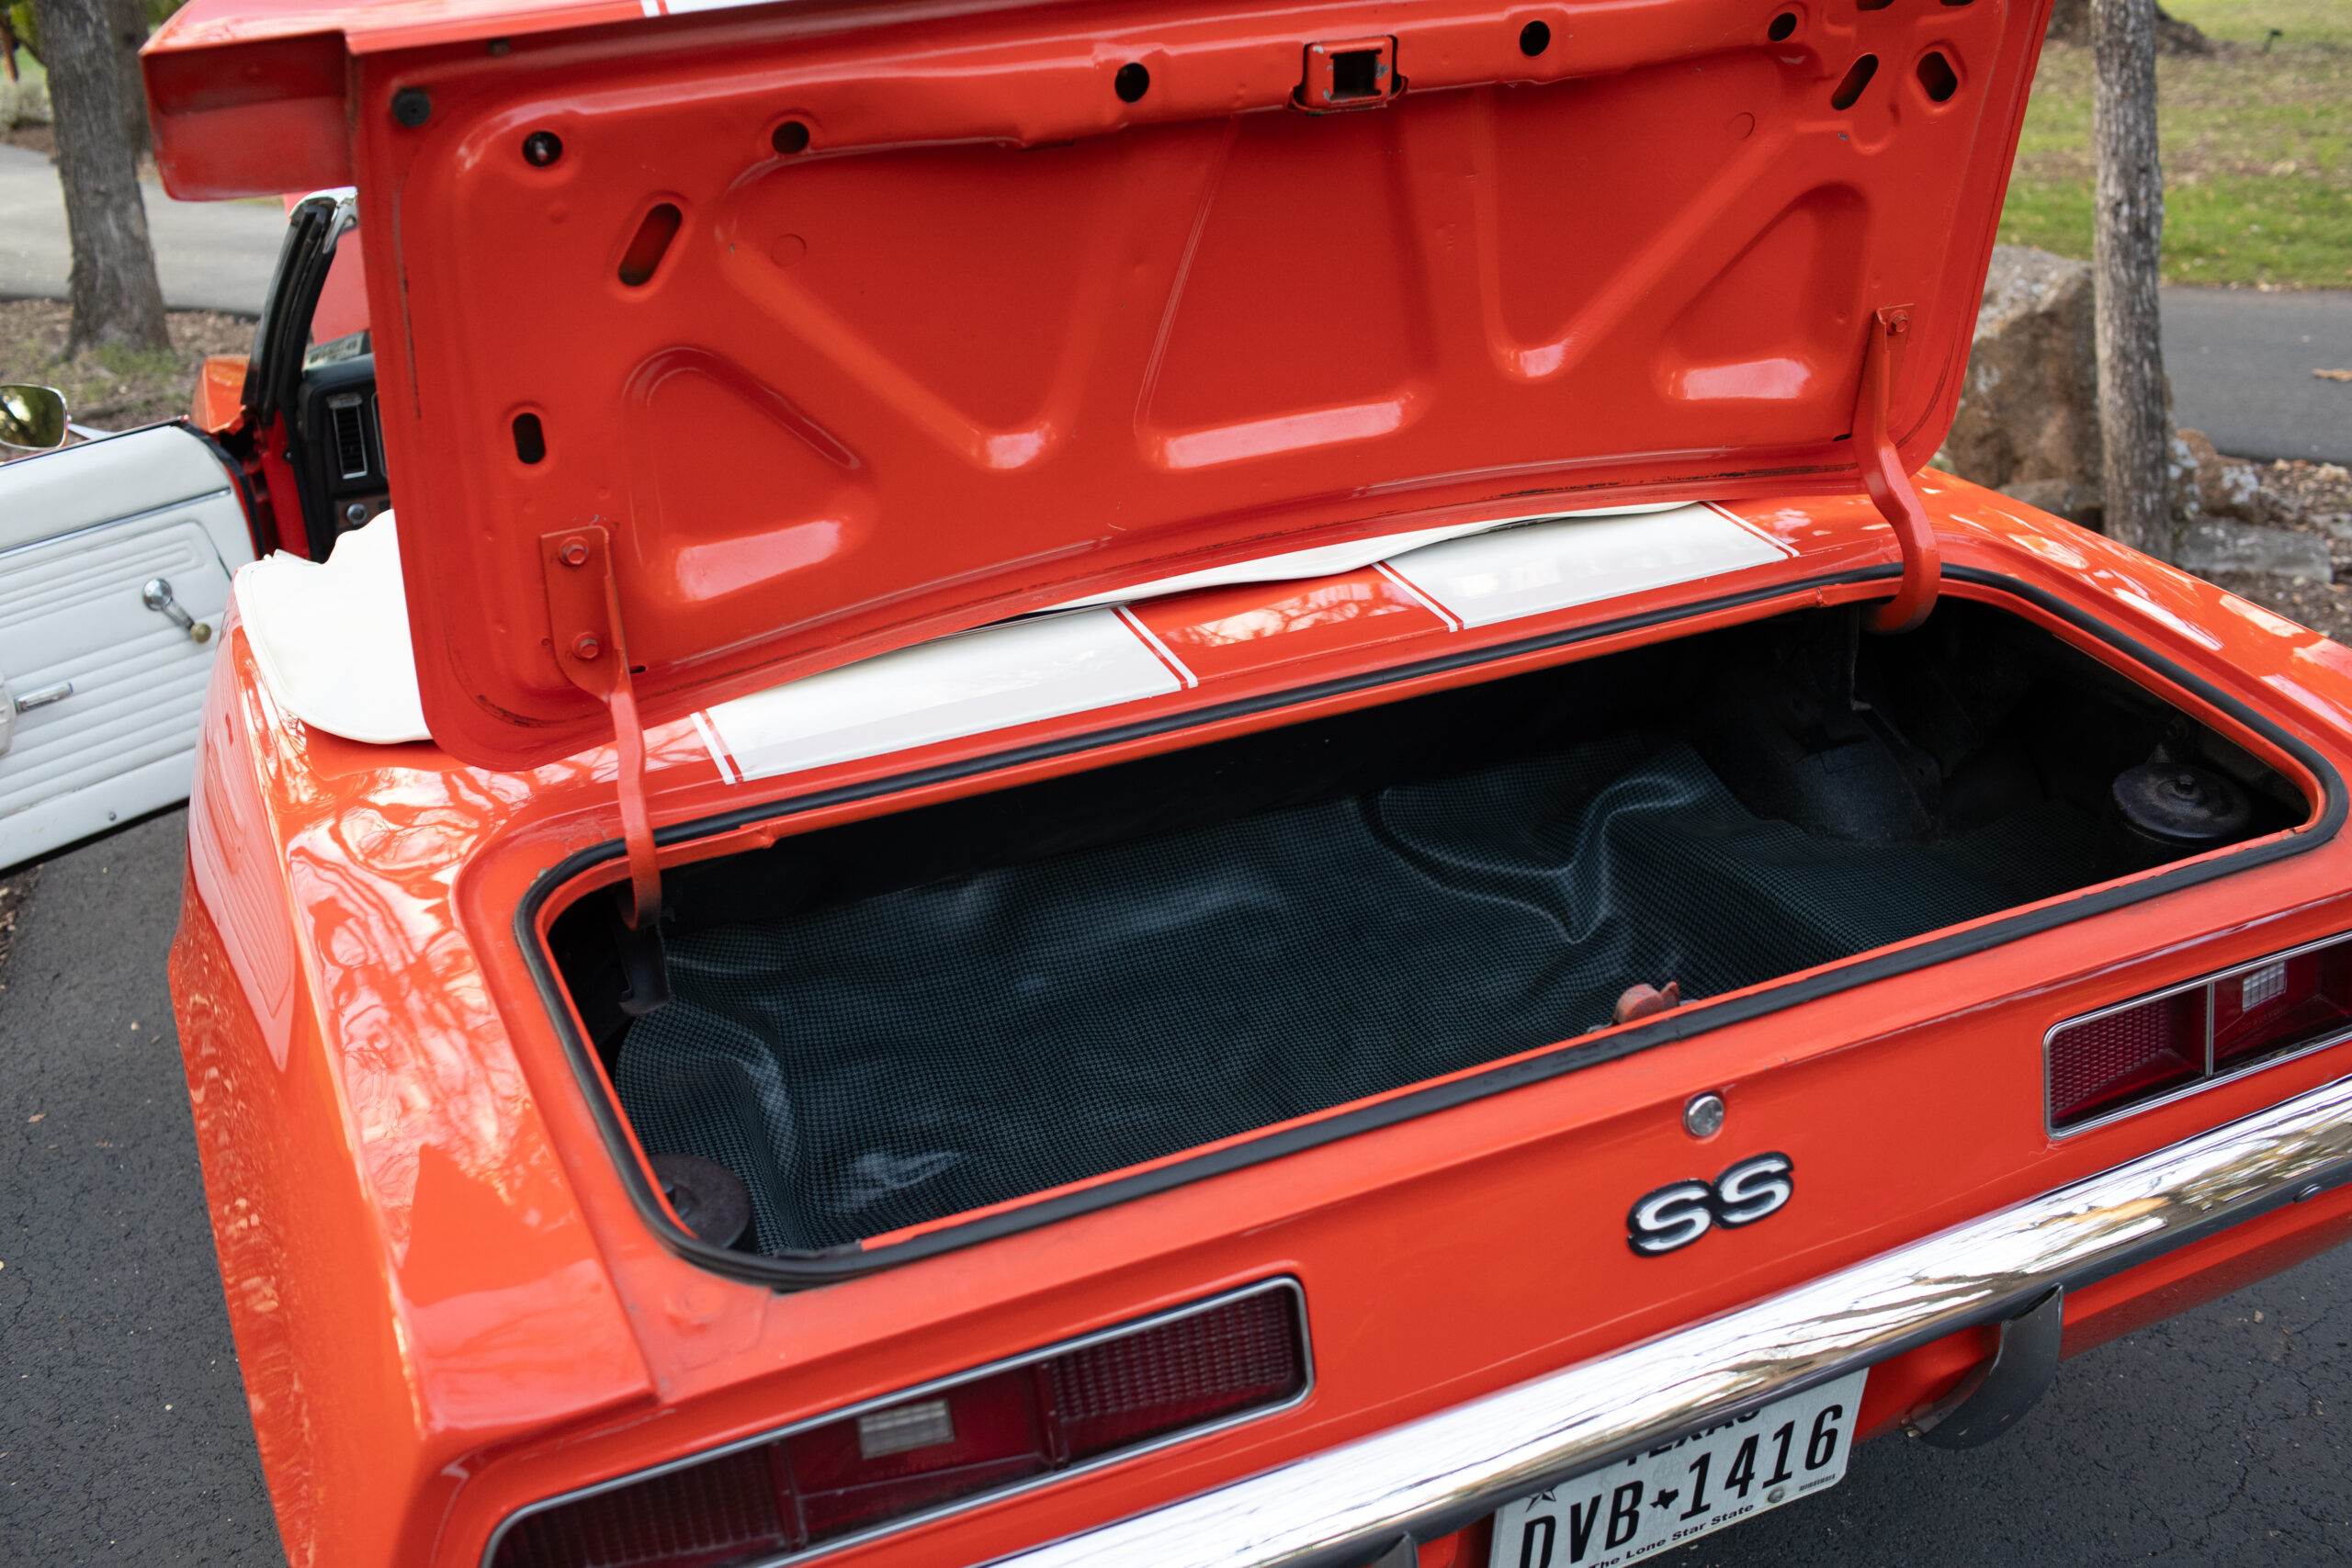 Open trunk of an orange vintage car with an SS badge, displaying a clean, empty cargo area. A white door and trees are visible in the background.